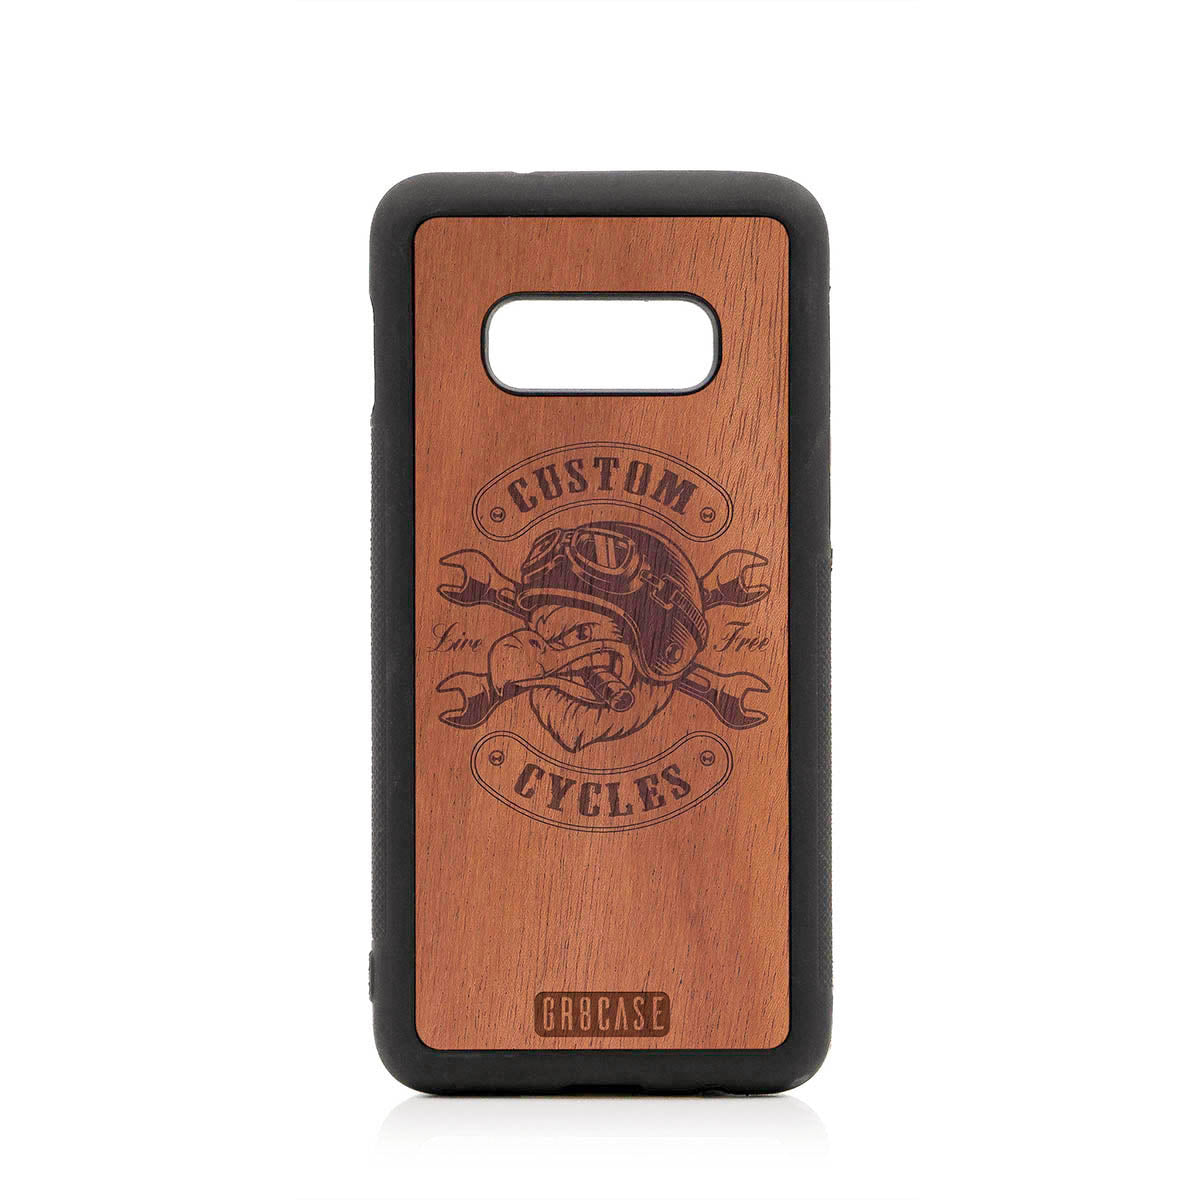 Custom Cycles Live Free (Biker Eagle) Design Wood Case For Samsung Galaxy S10E by GR8CASE